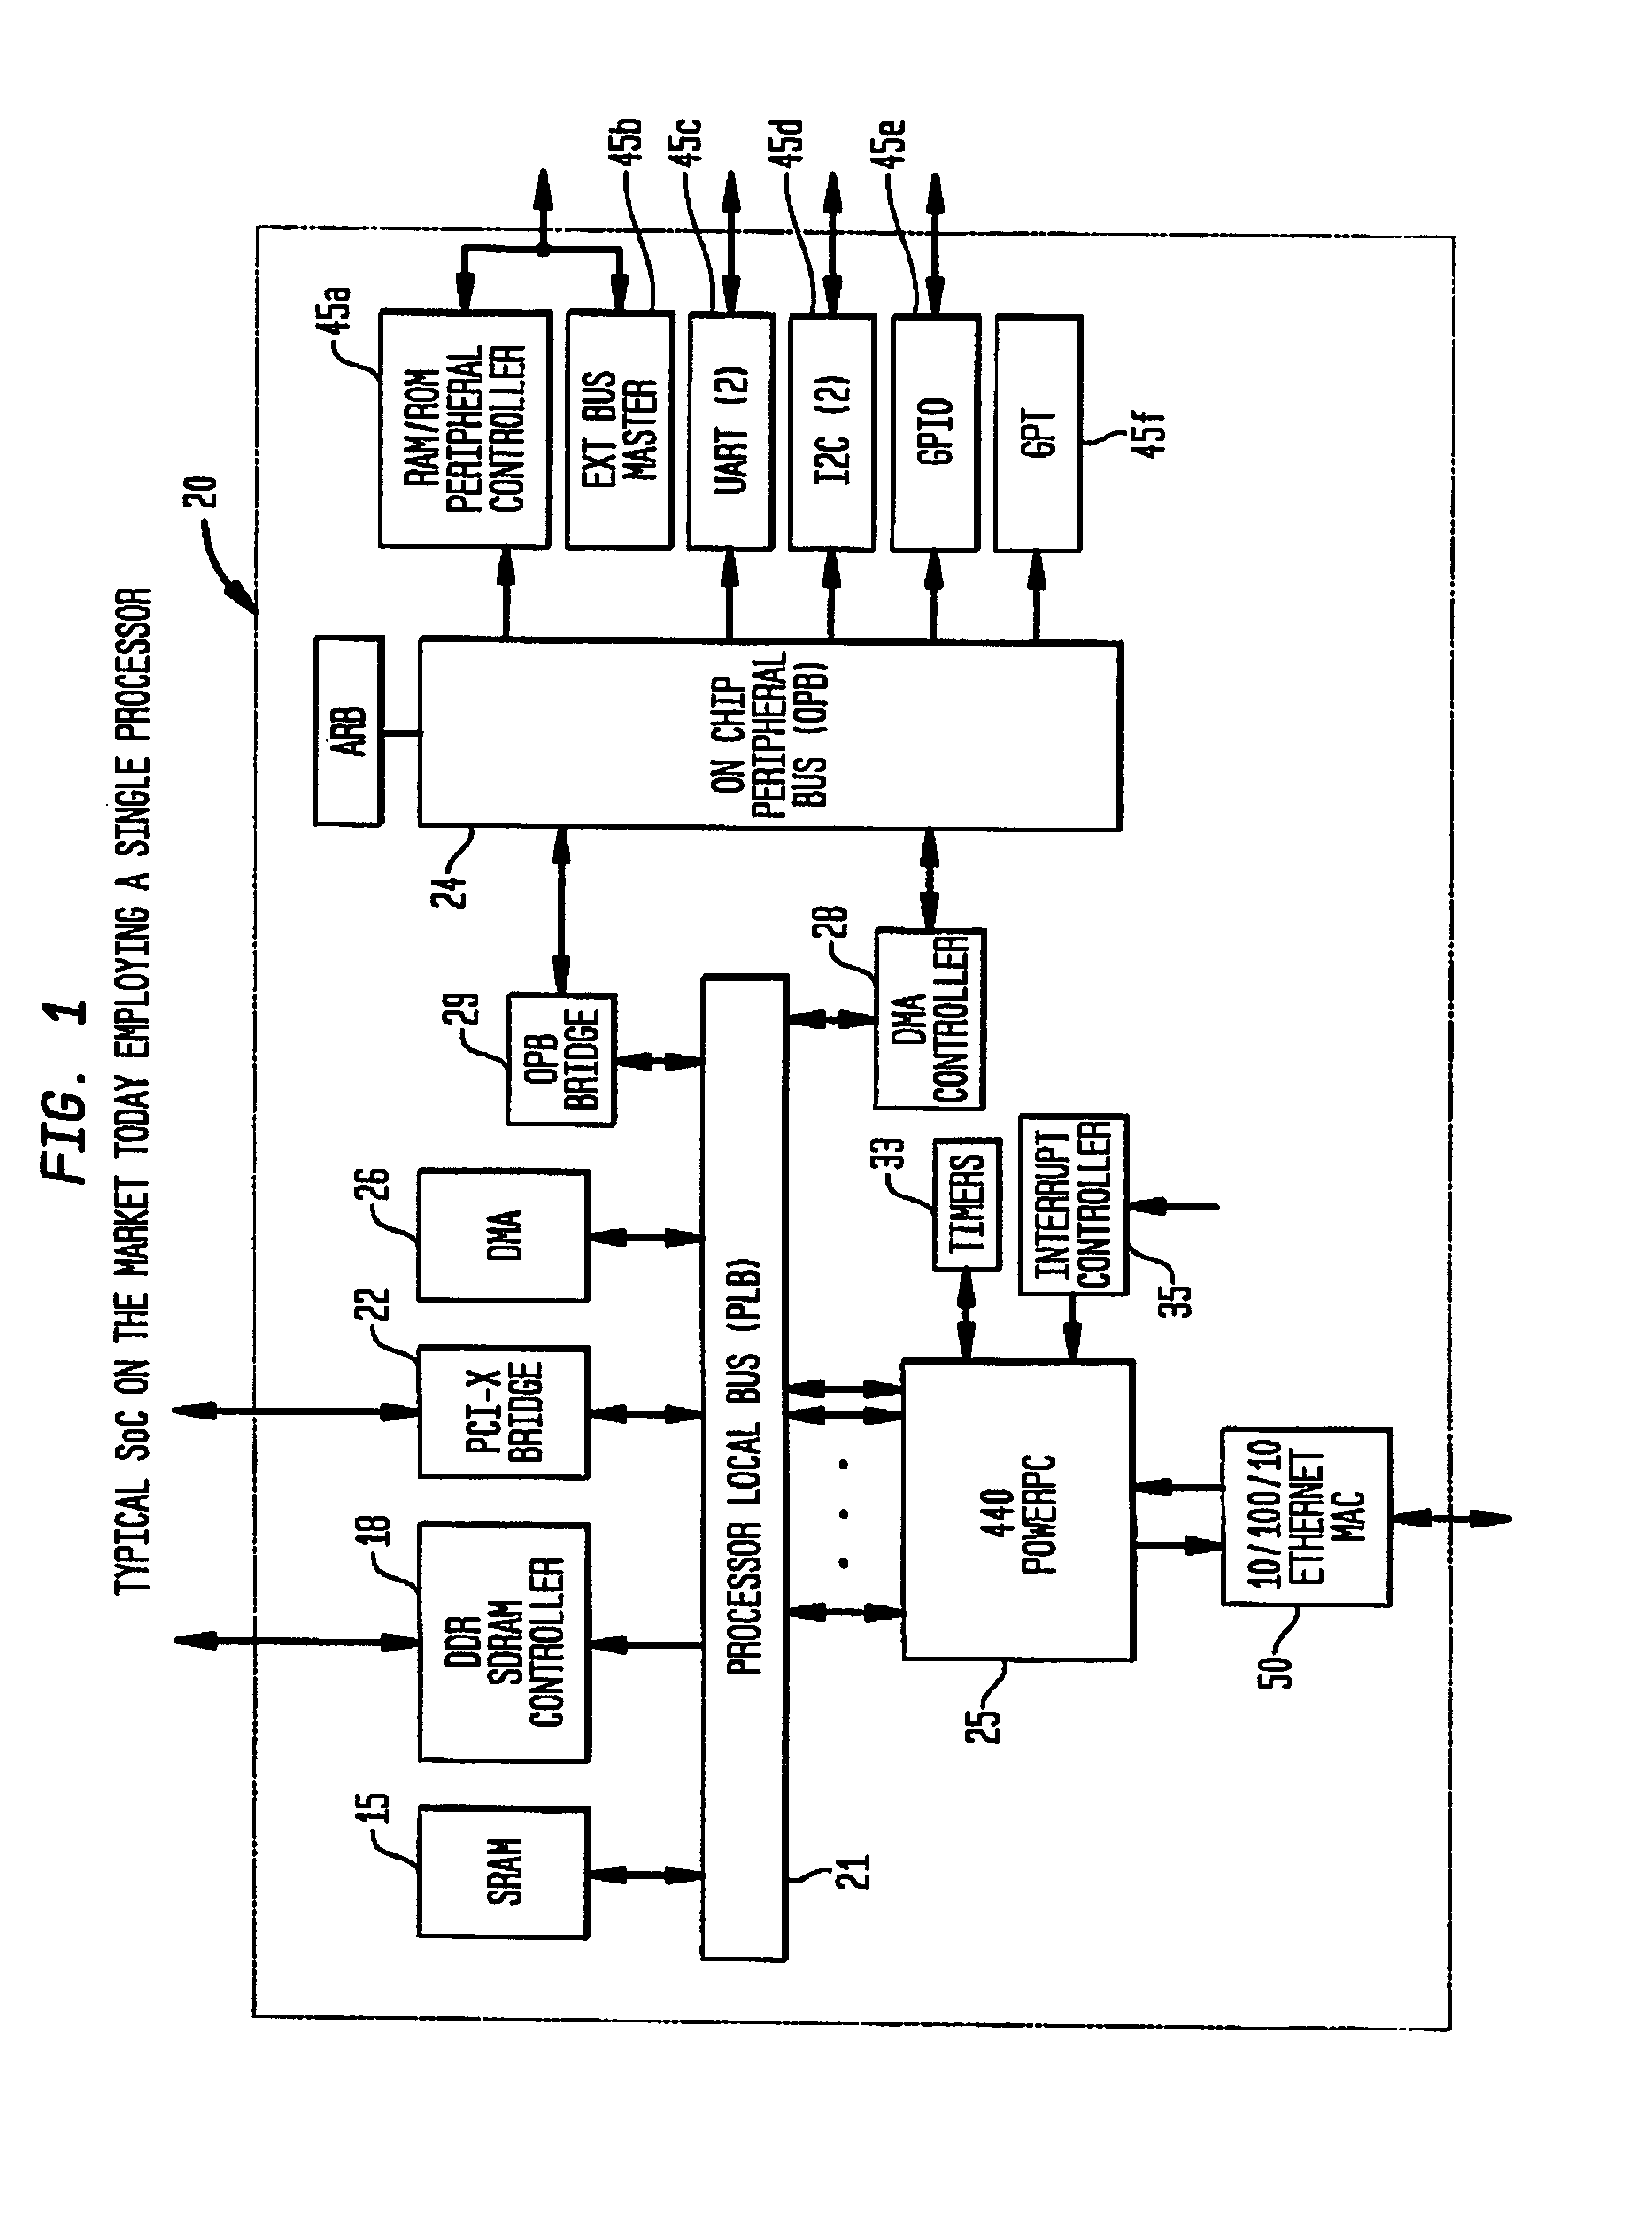 Network processor system on chip with bridge coupling protocol converting multiprocessor macro core local bus to peripheral interfaces coupled system bus